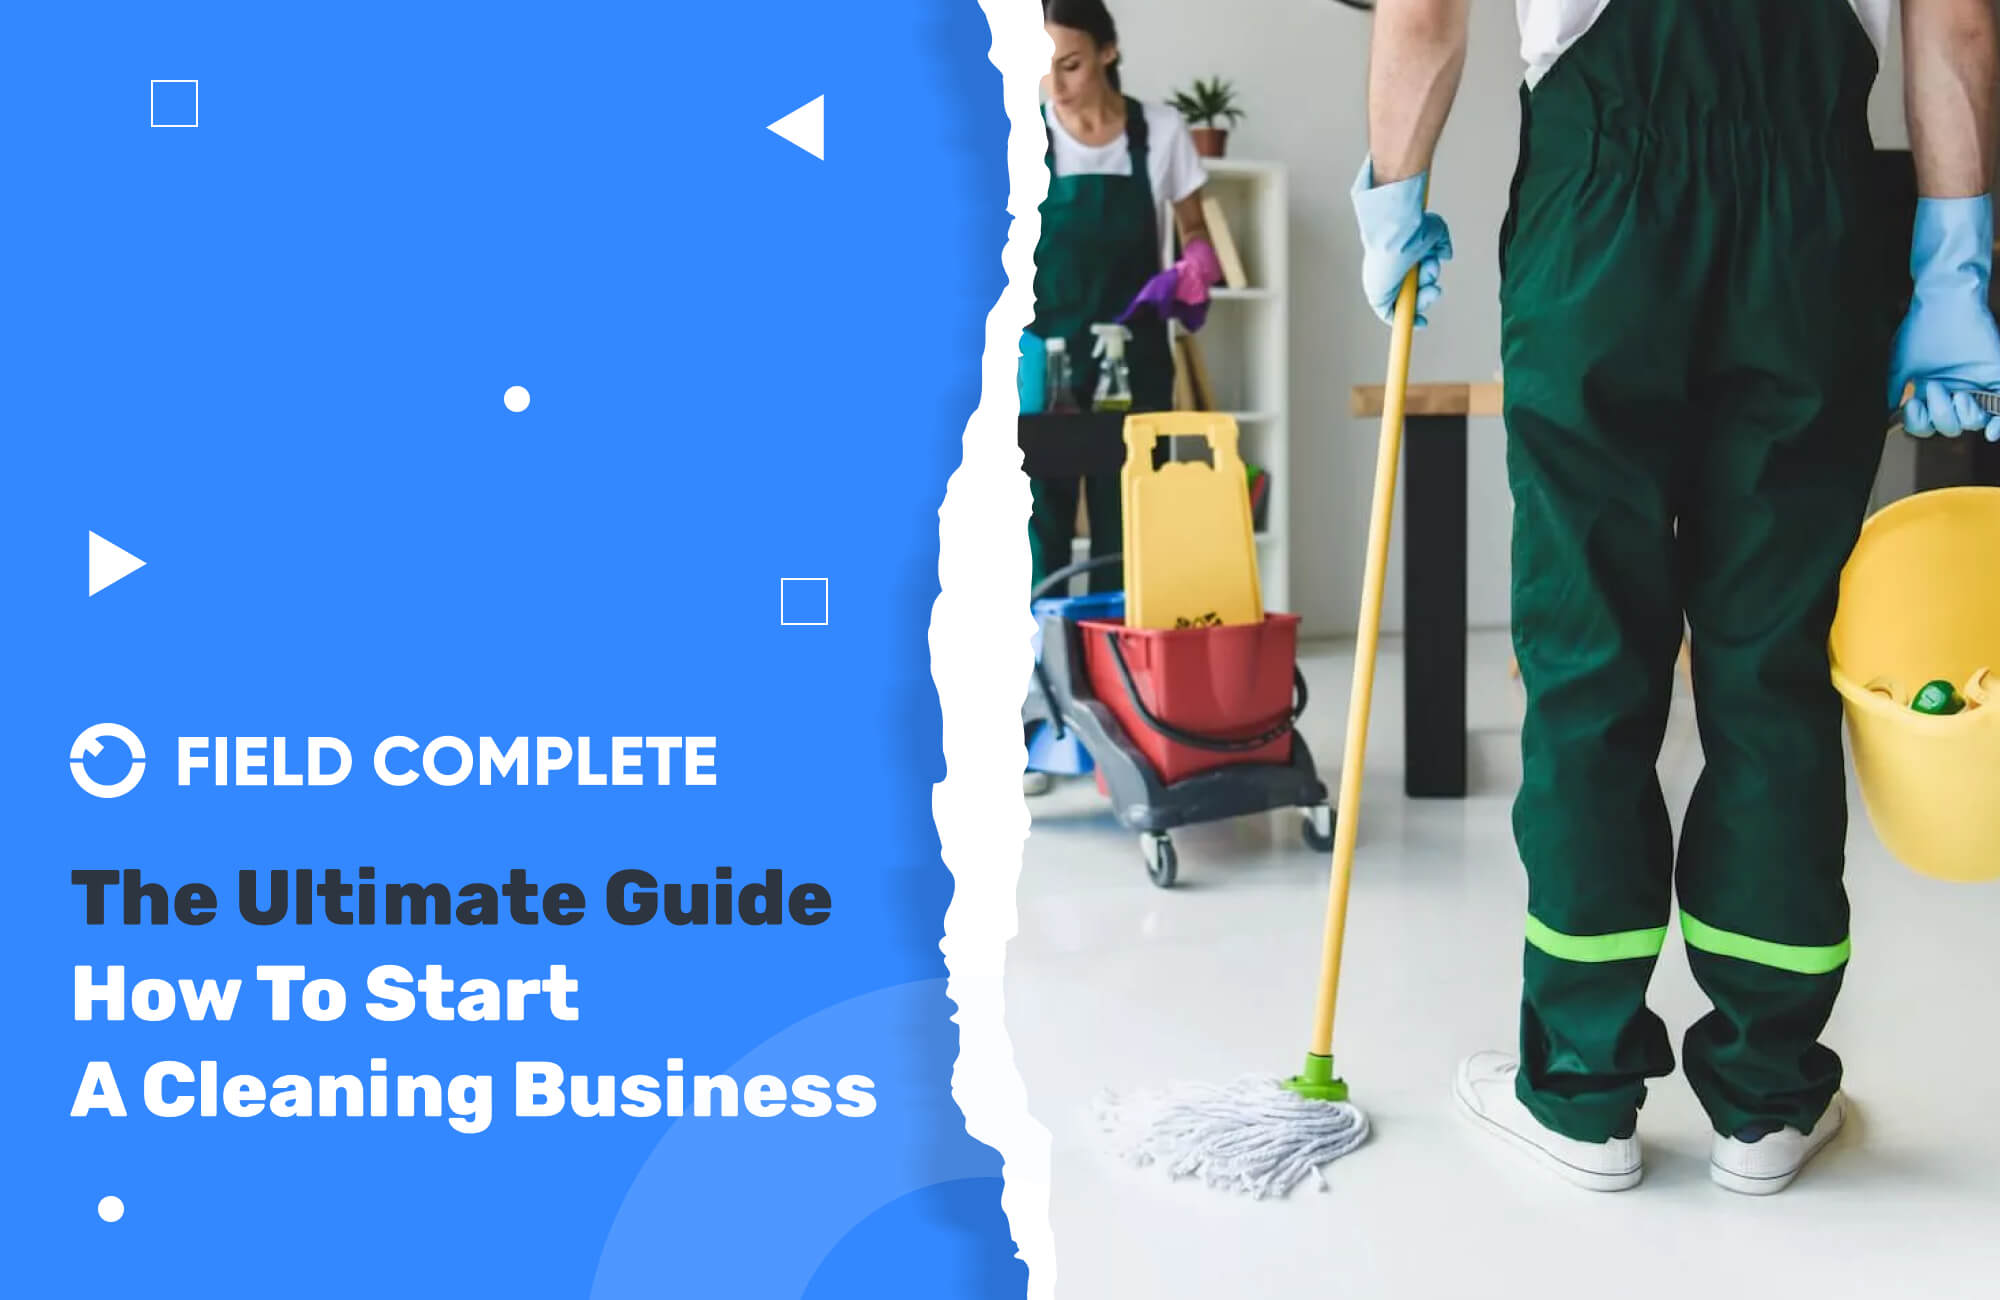 How to Start a Cleaning Business – The Ultimate Guide